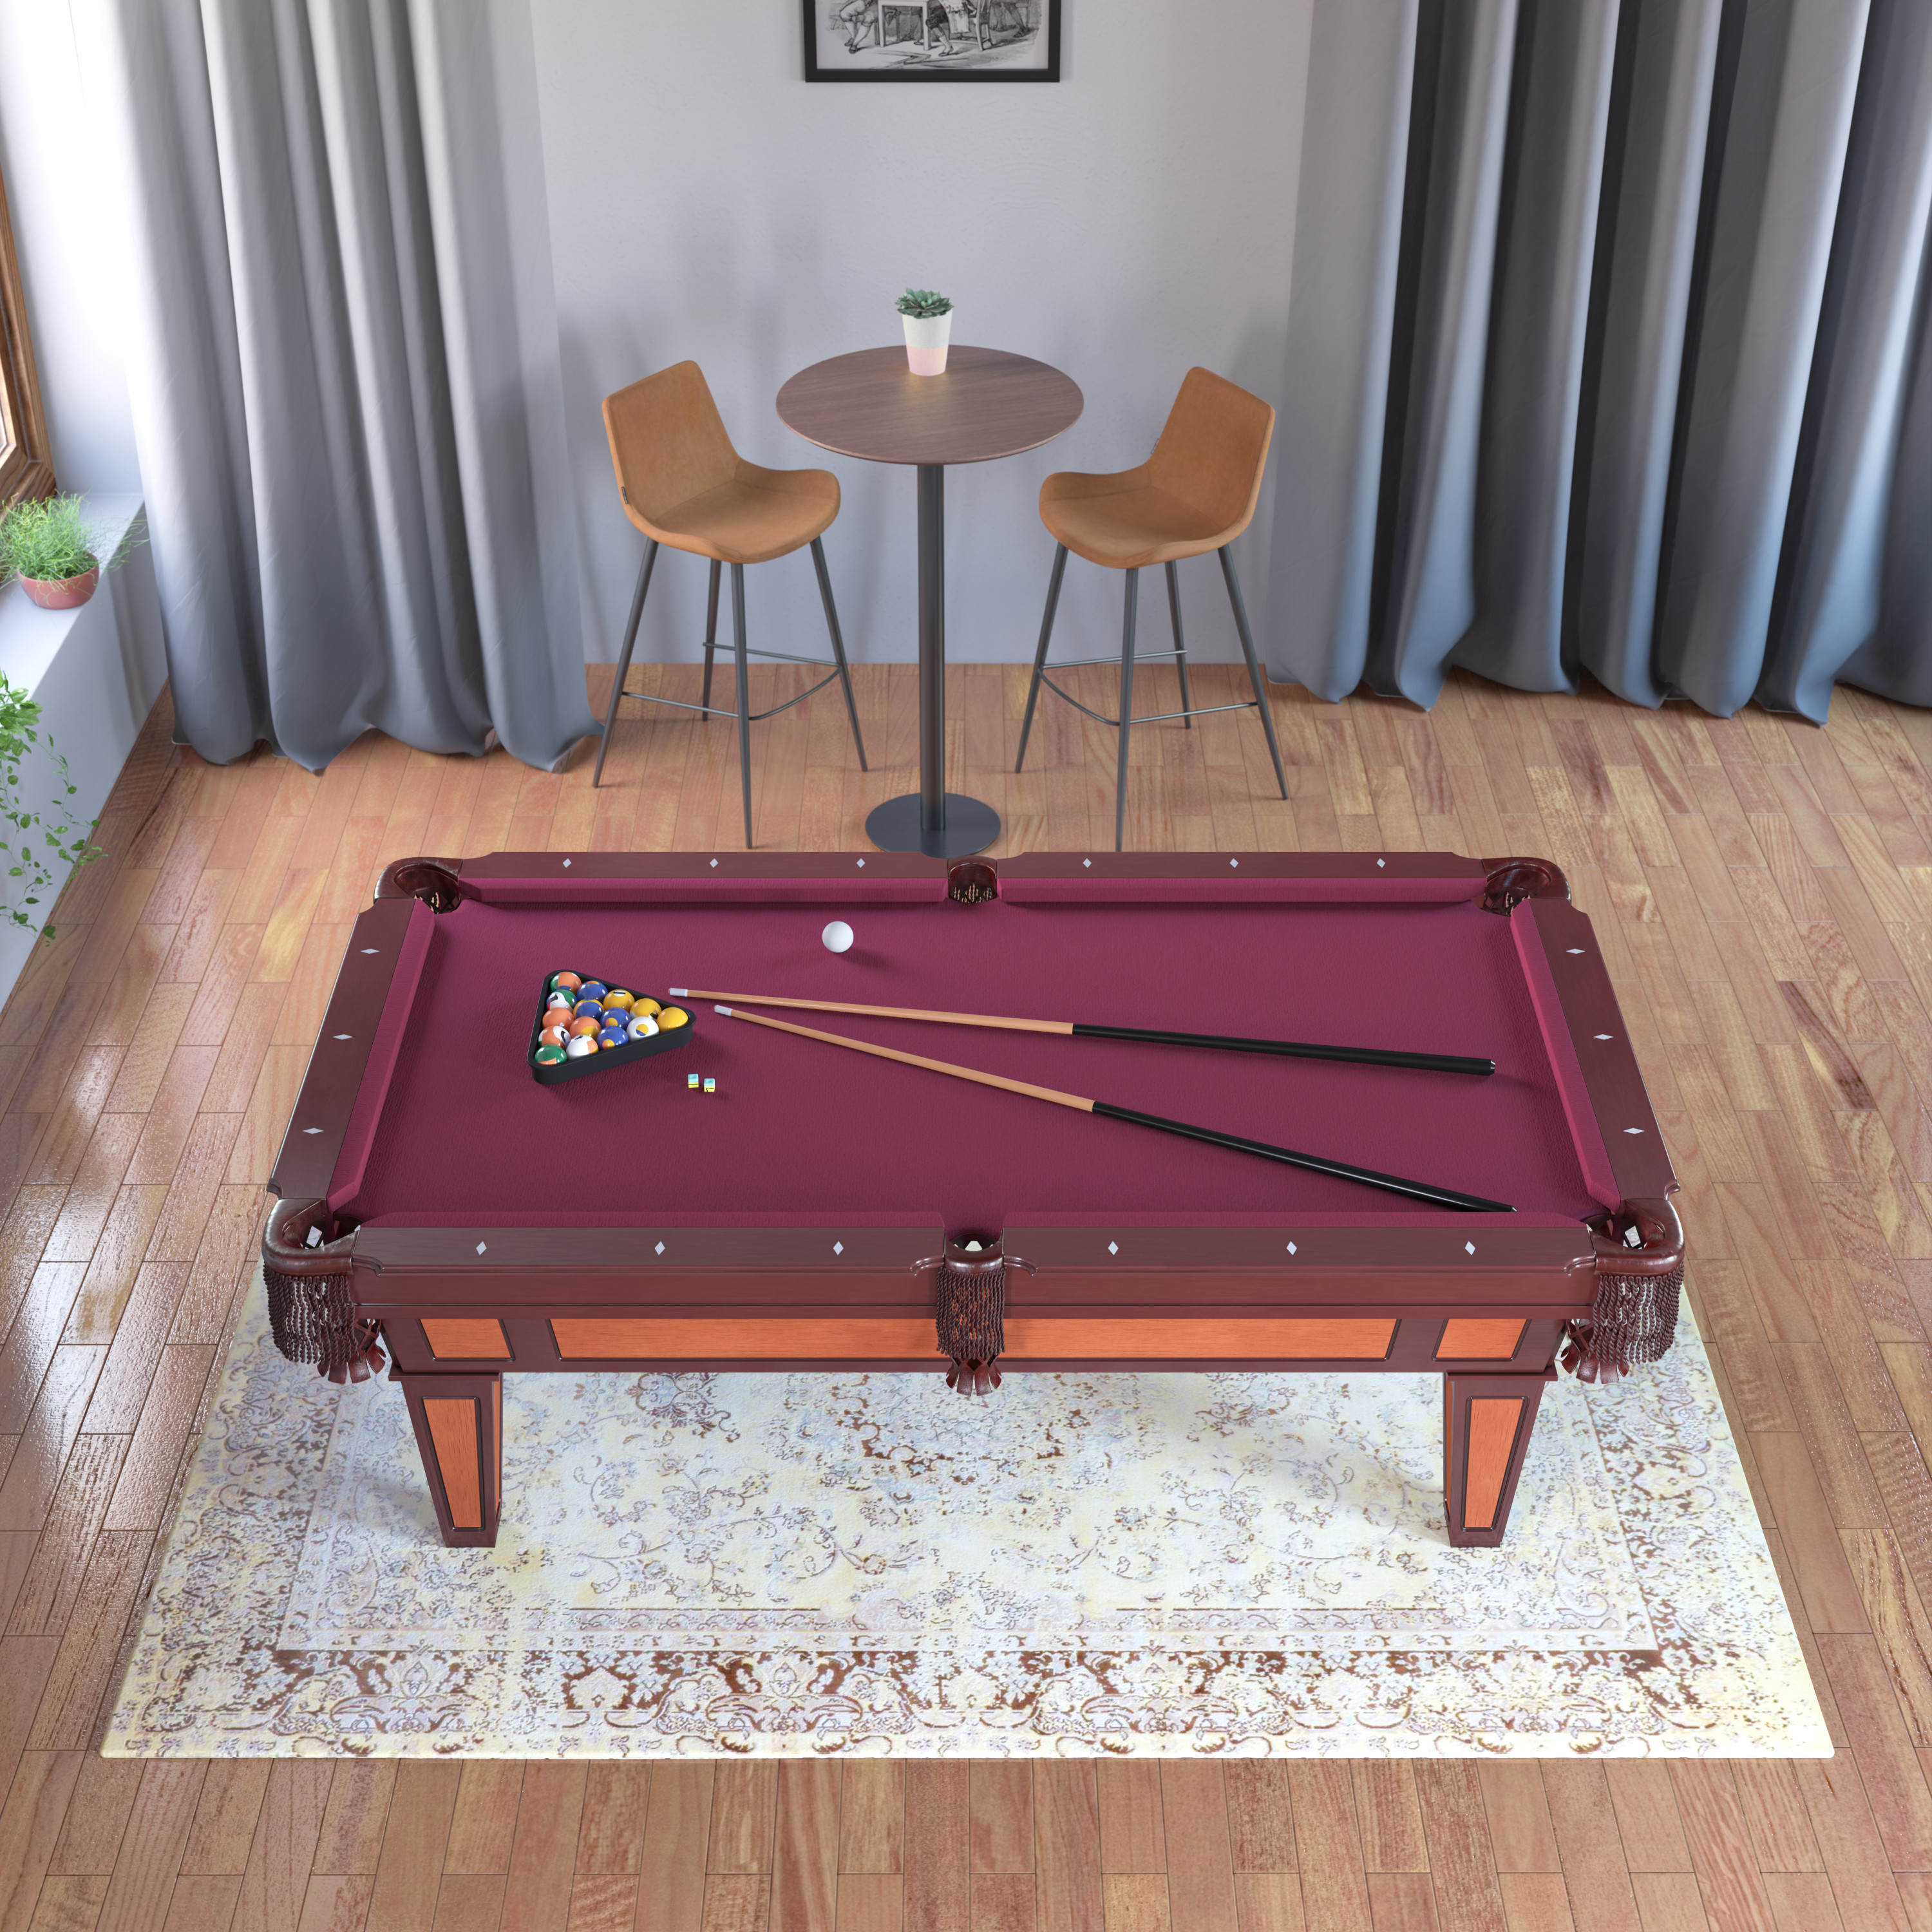 Fat Cat Reno 7.5' Pool Table with Pool Cues and Accessories - image 9 of 13